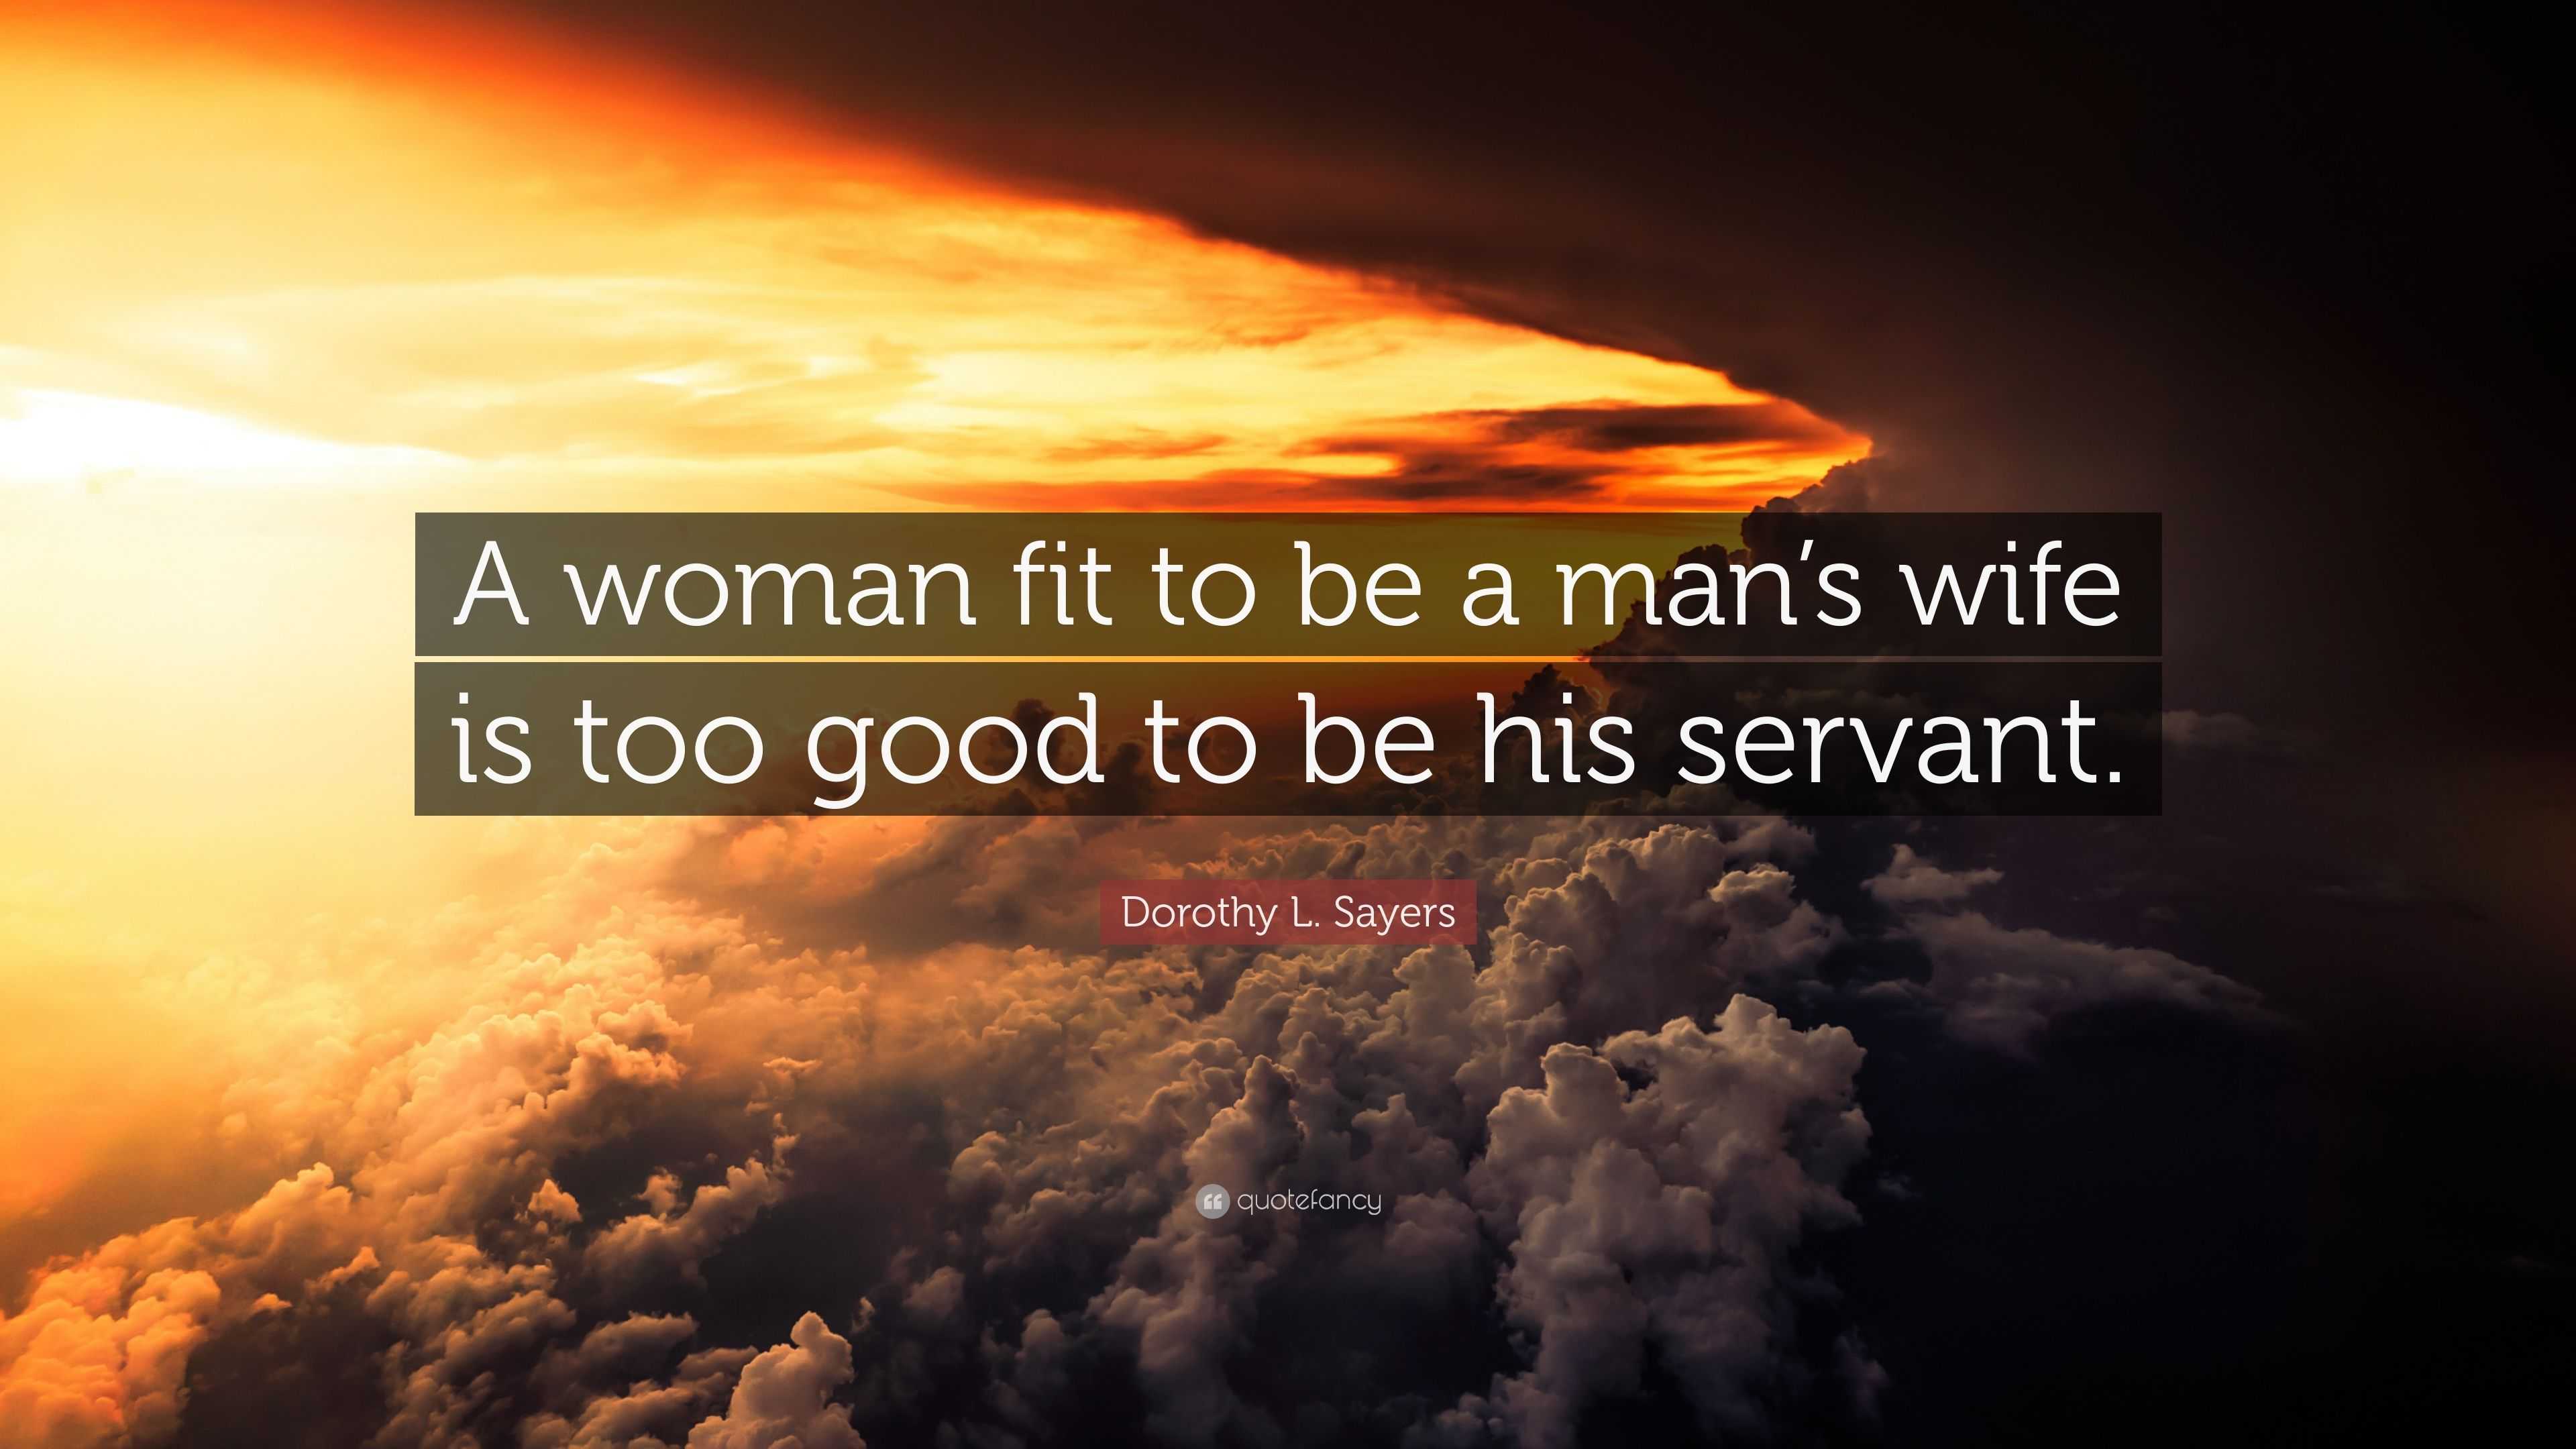 Dorothy L. Sayers Quote: “A woman fit to be a man’s wife is too good to ...